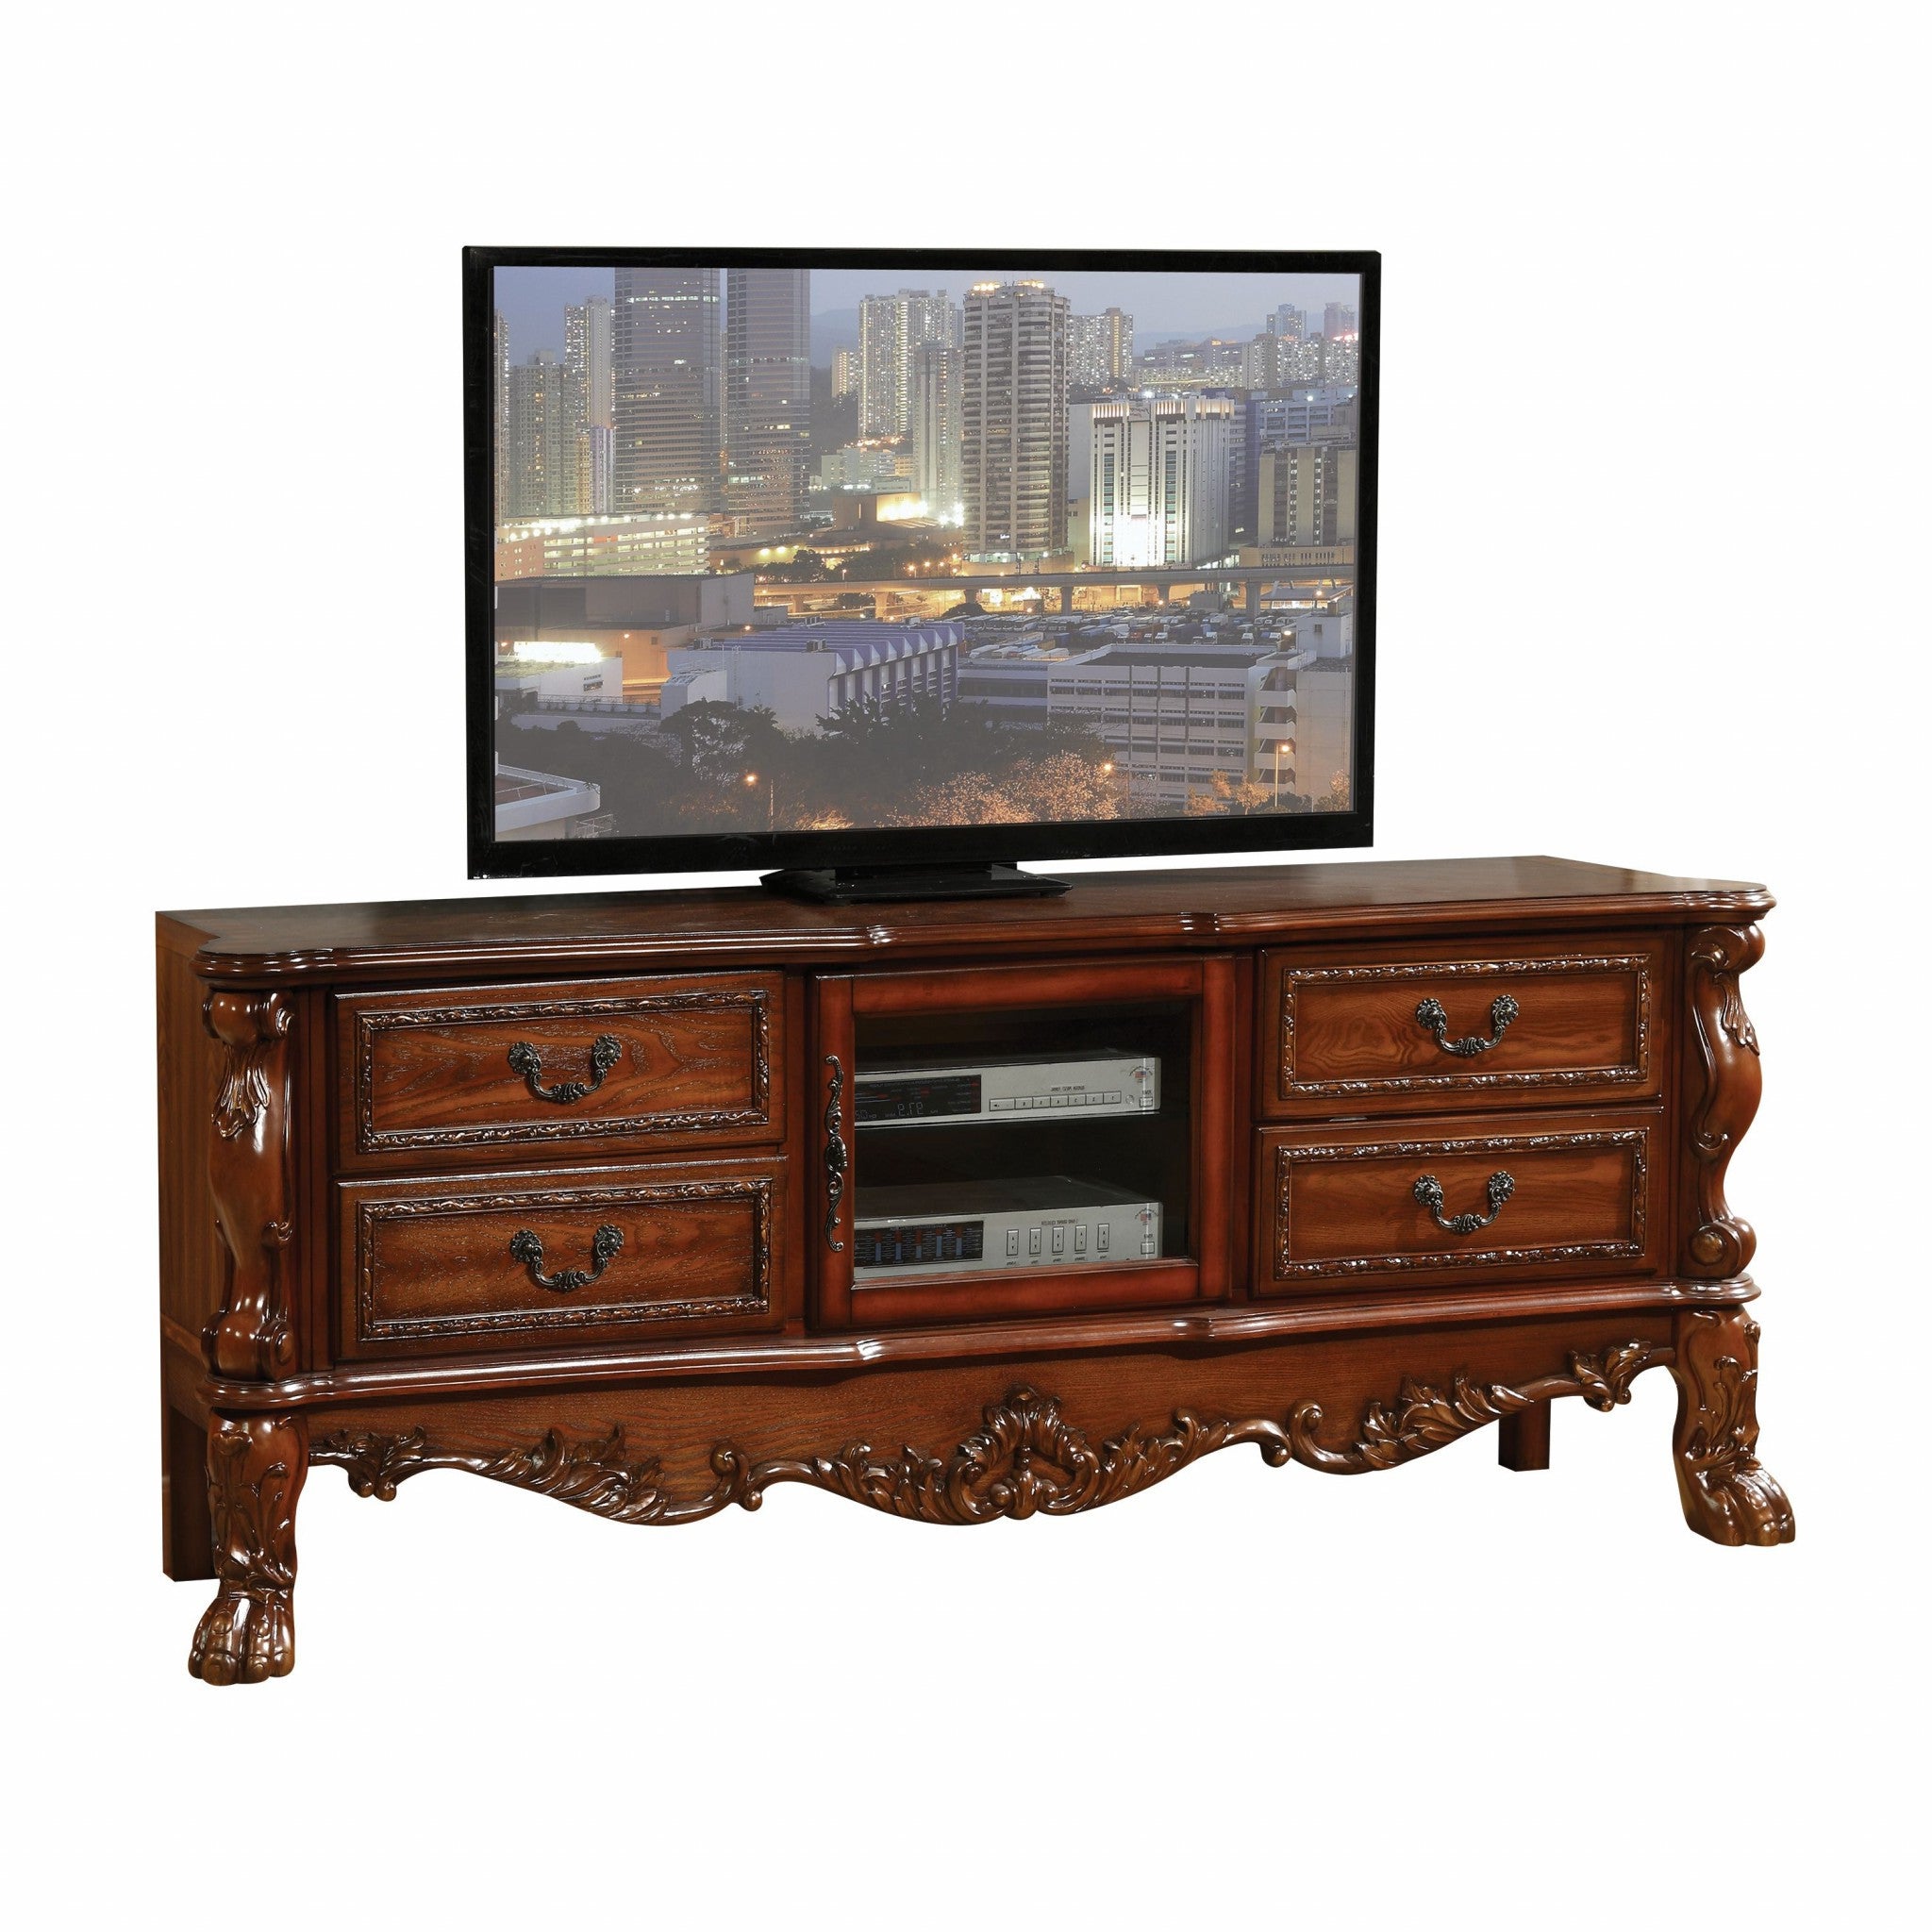 21" X 74" X 31" Antique Platinum Wood Poly Resin Glass Tv Console